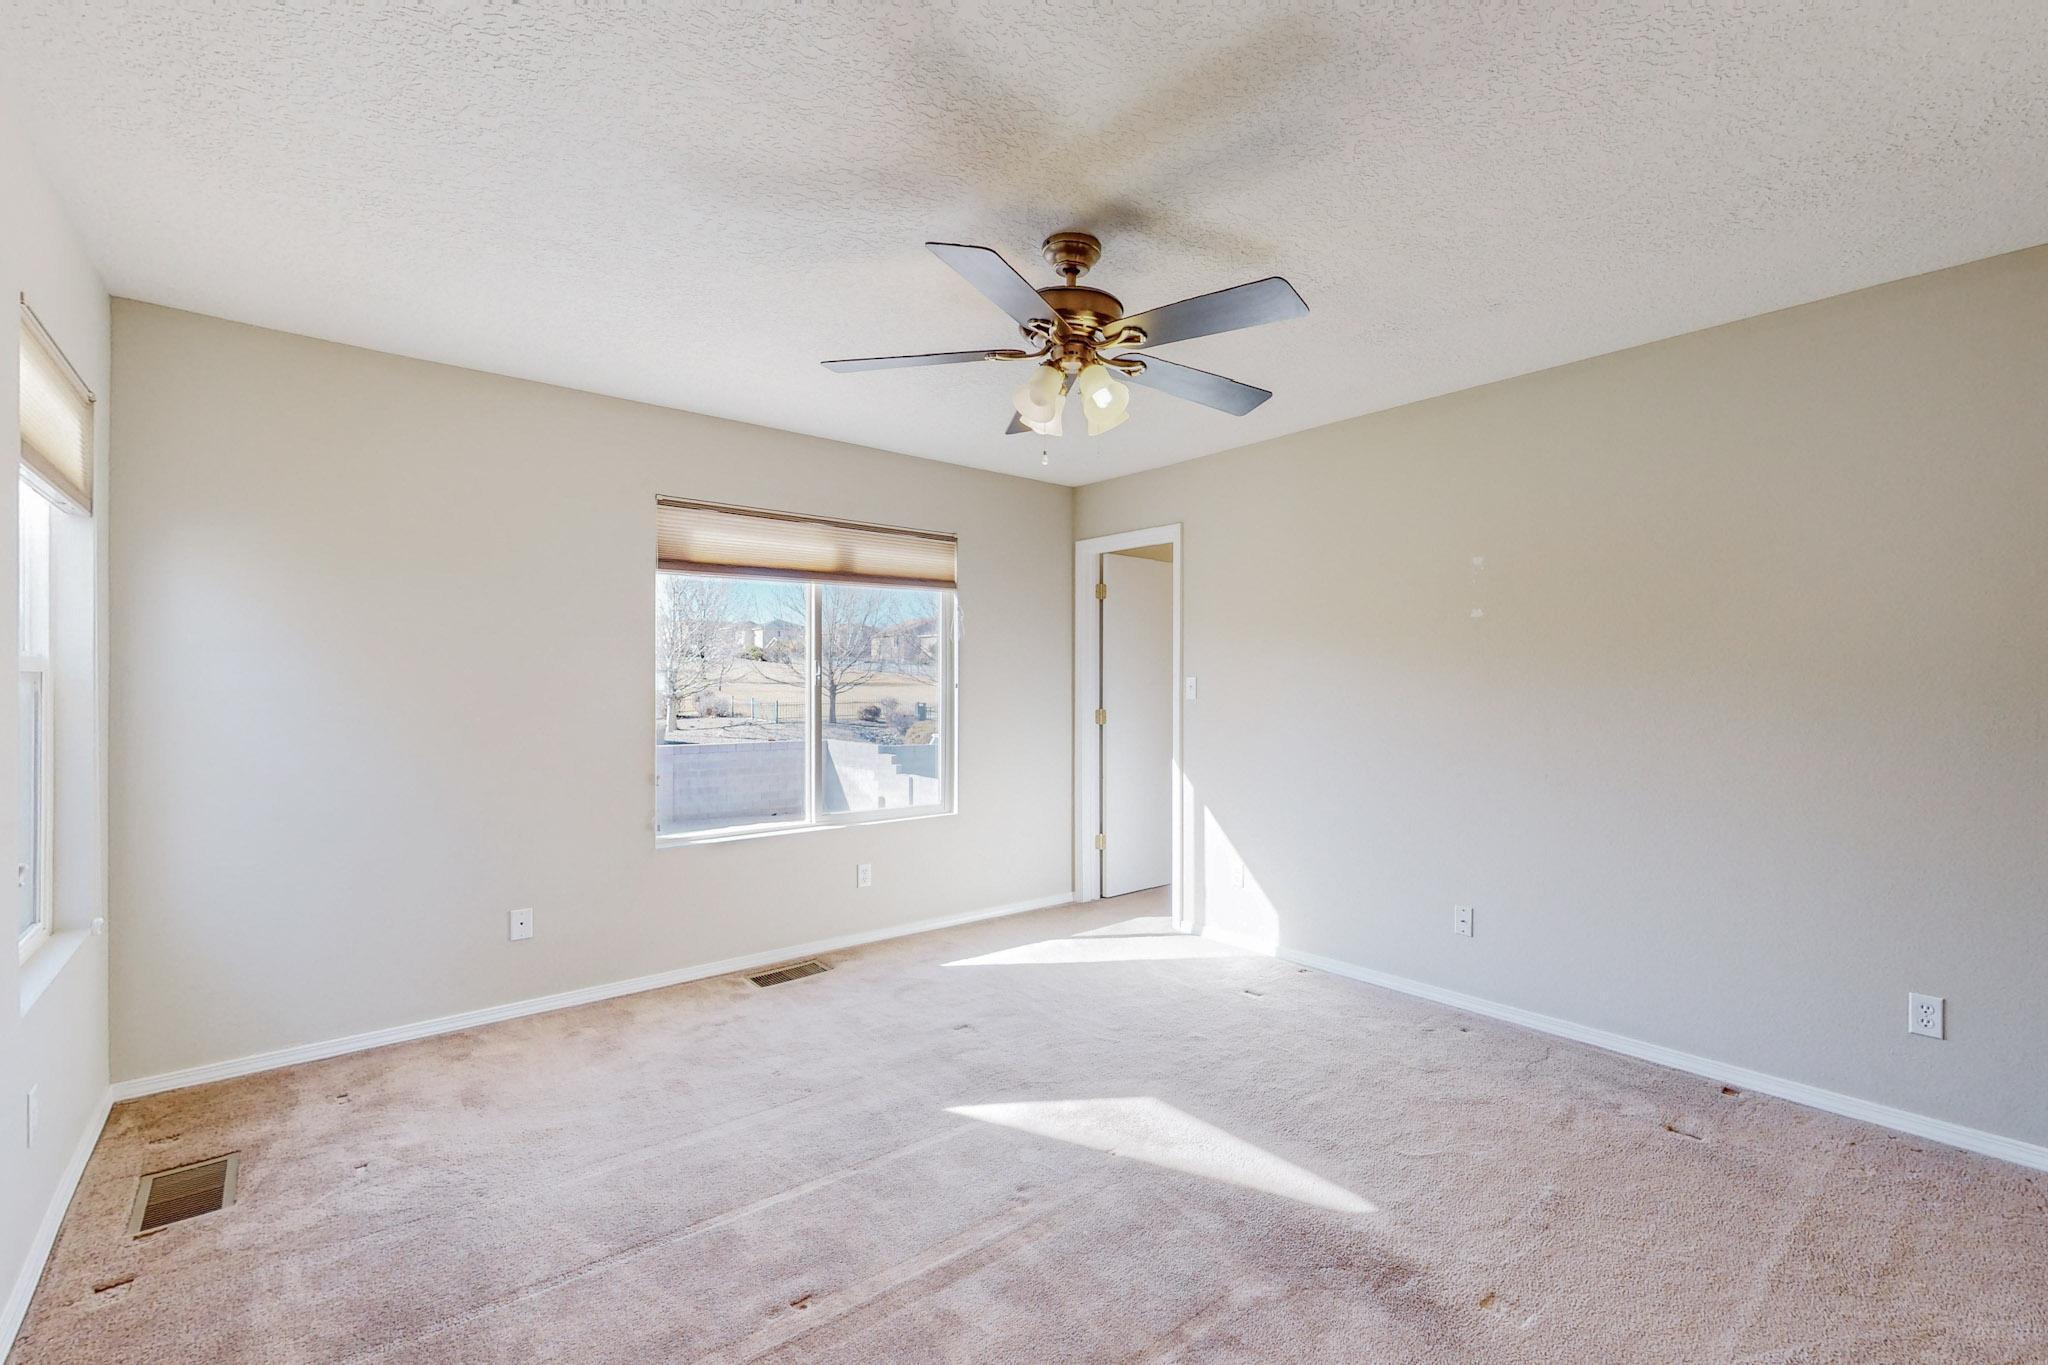 6015 Park South Place NW, Albuquerque, New Mexico 87114, 3 Bedrooms Bedrooms, ,3 BathroomsBathrooms,Residential,For Sale,6015 Park South Place NW,1058350